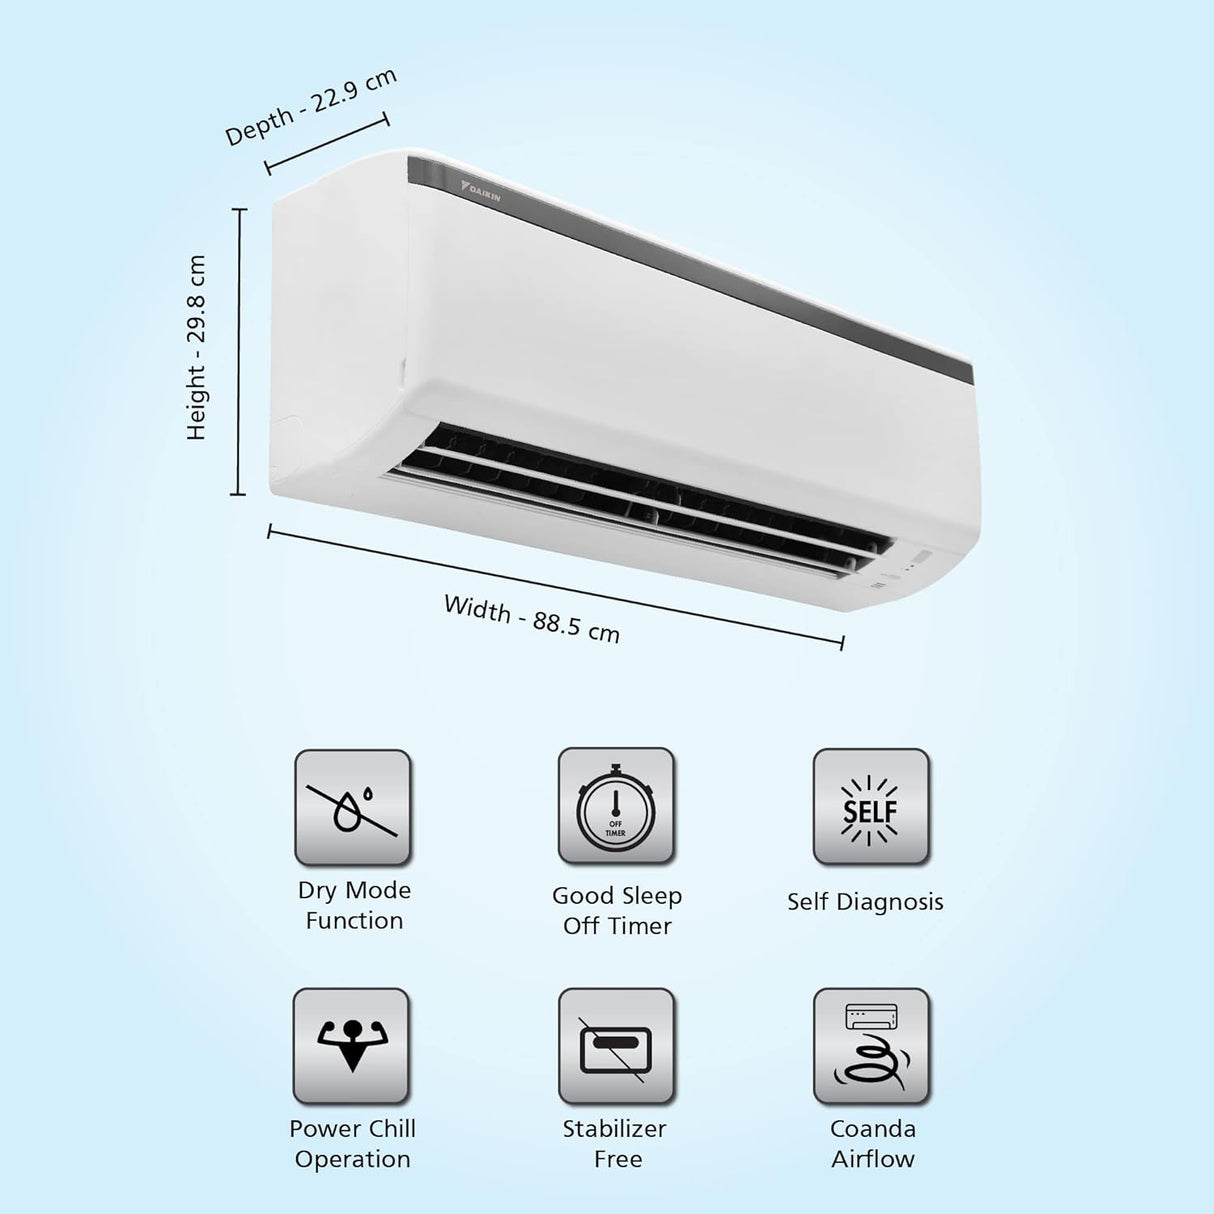 Reliable Cooling Solution: Daikin 1.8T 1 Star AC - Copper, Antibacterial Filter, White.